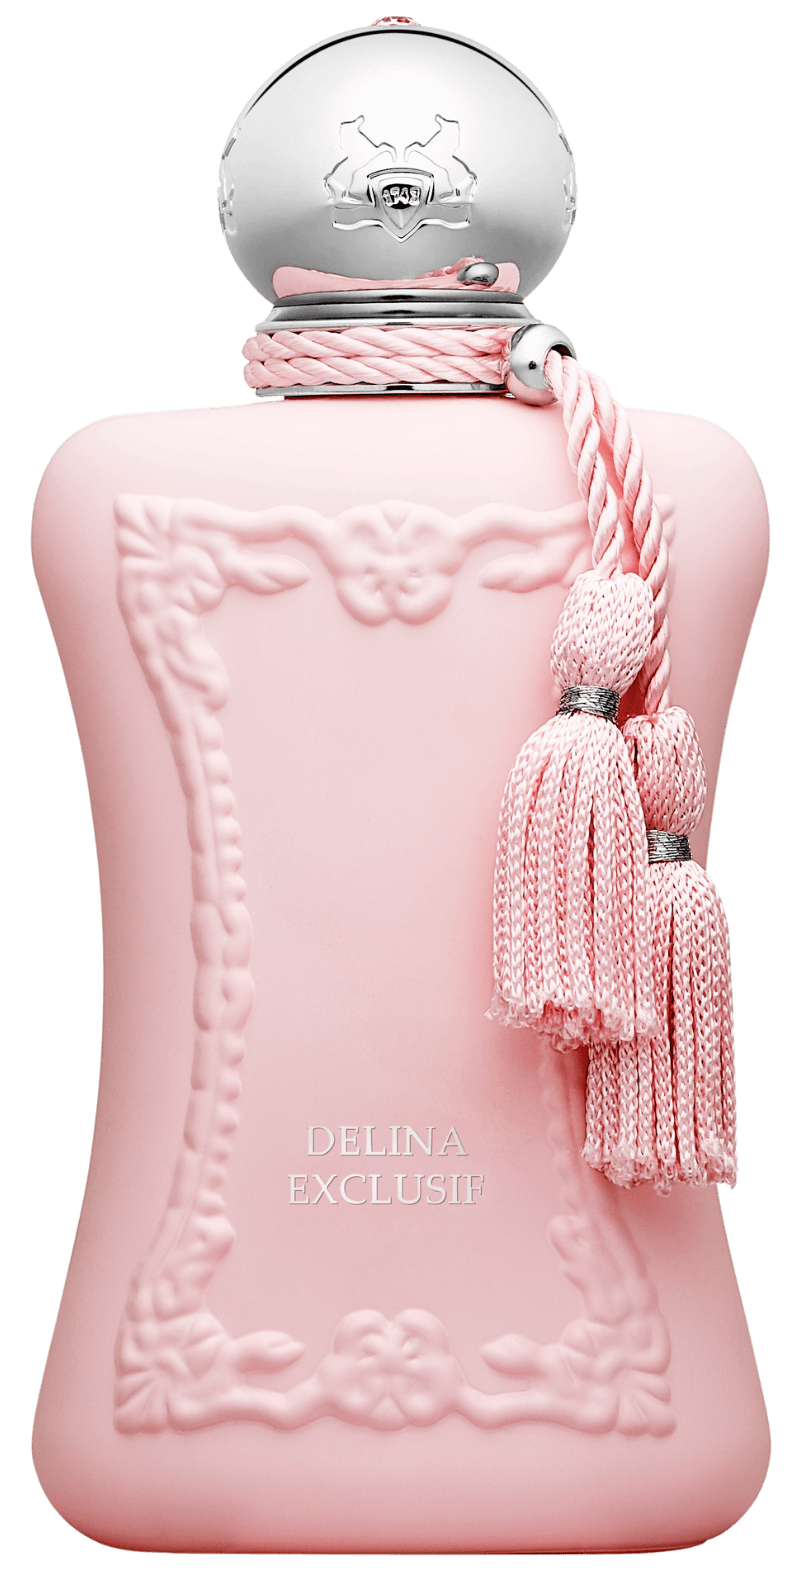 &#39;s Parfums de Marly Delina Exclusif - Bellini&#39;s Skin and Parfumerie 